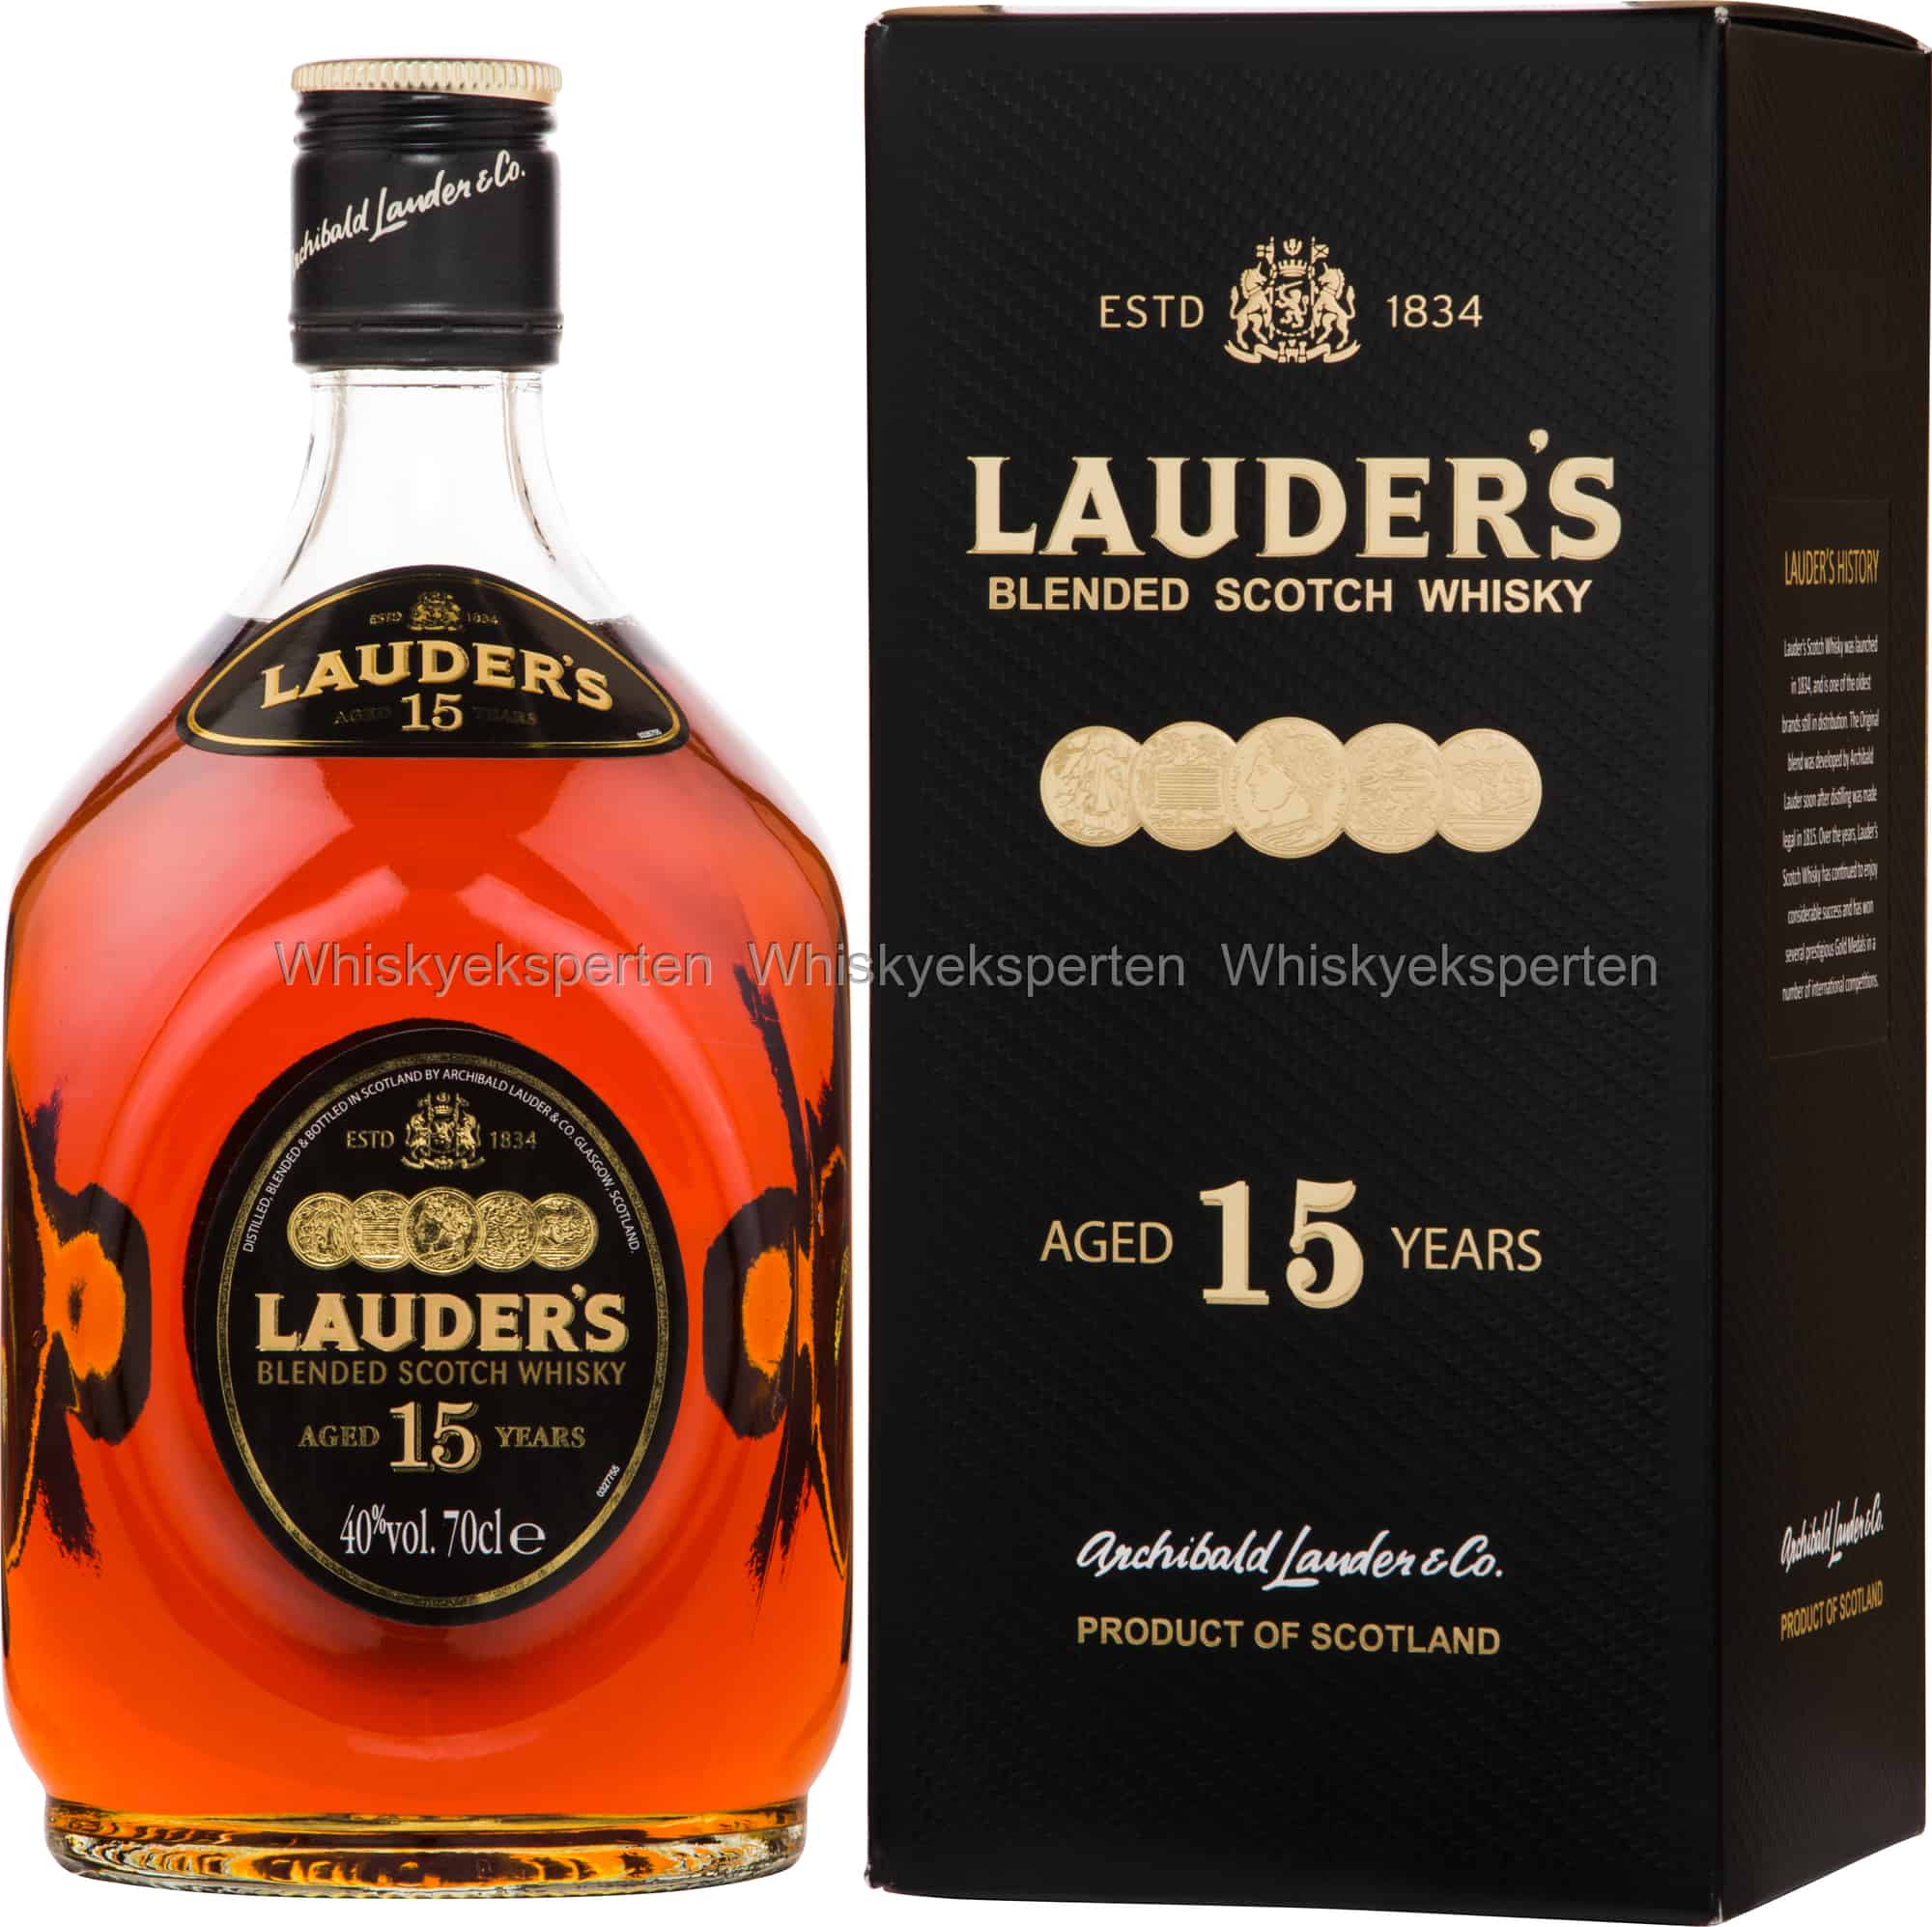 Lauders Blended Scotch